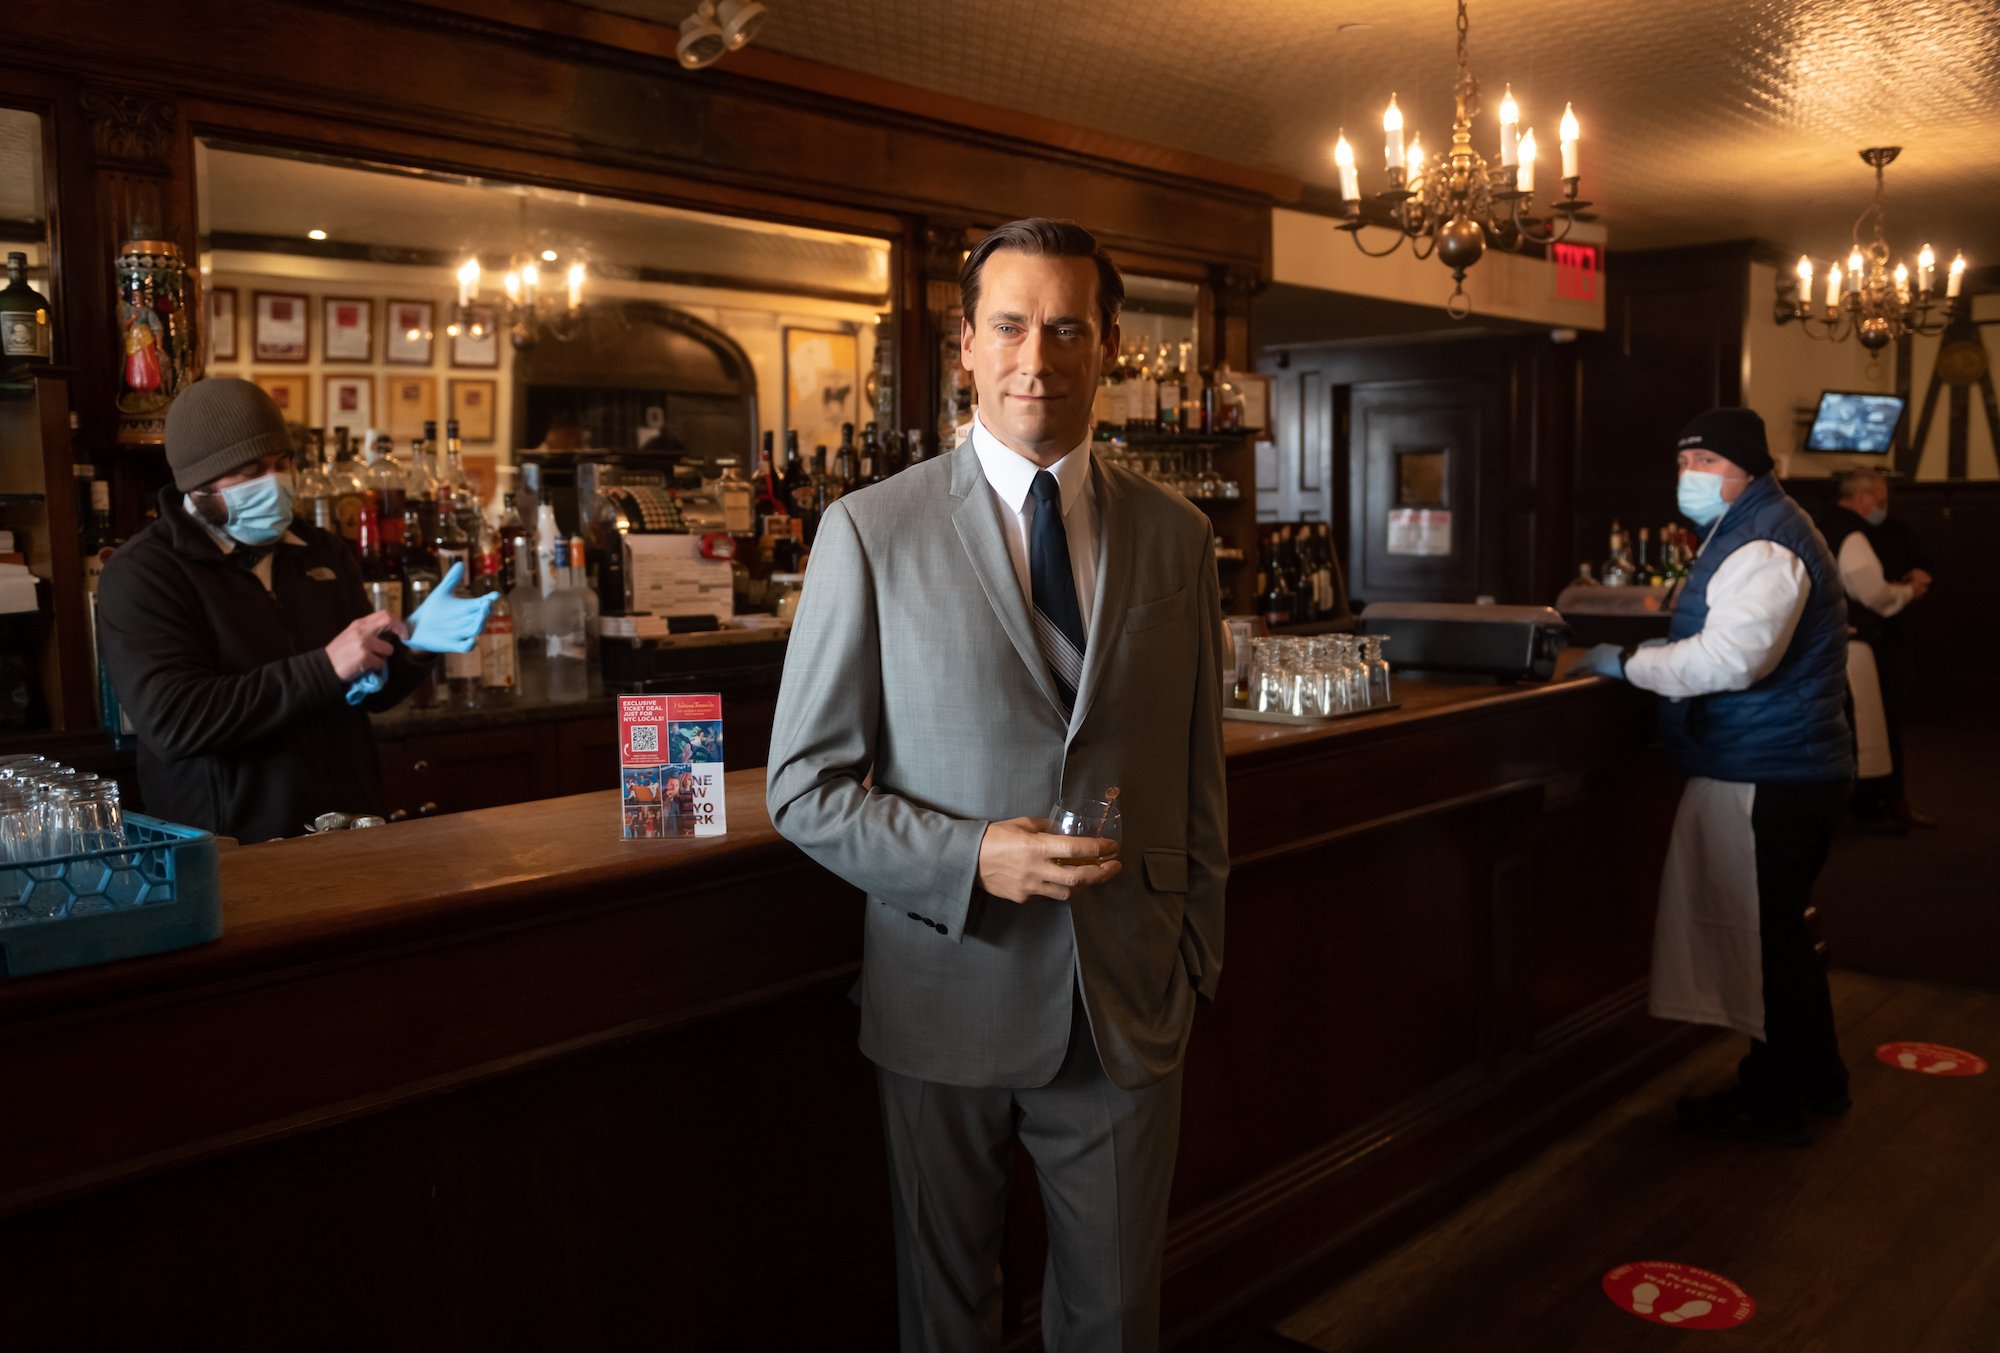 Madame Tussauds' Jon Hamm wax figure holds a glass of whiskey by the bar at Peter Luger Steak House in New York City in February 2021